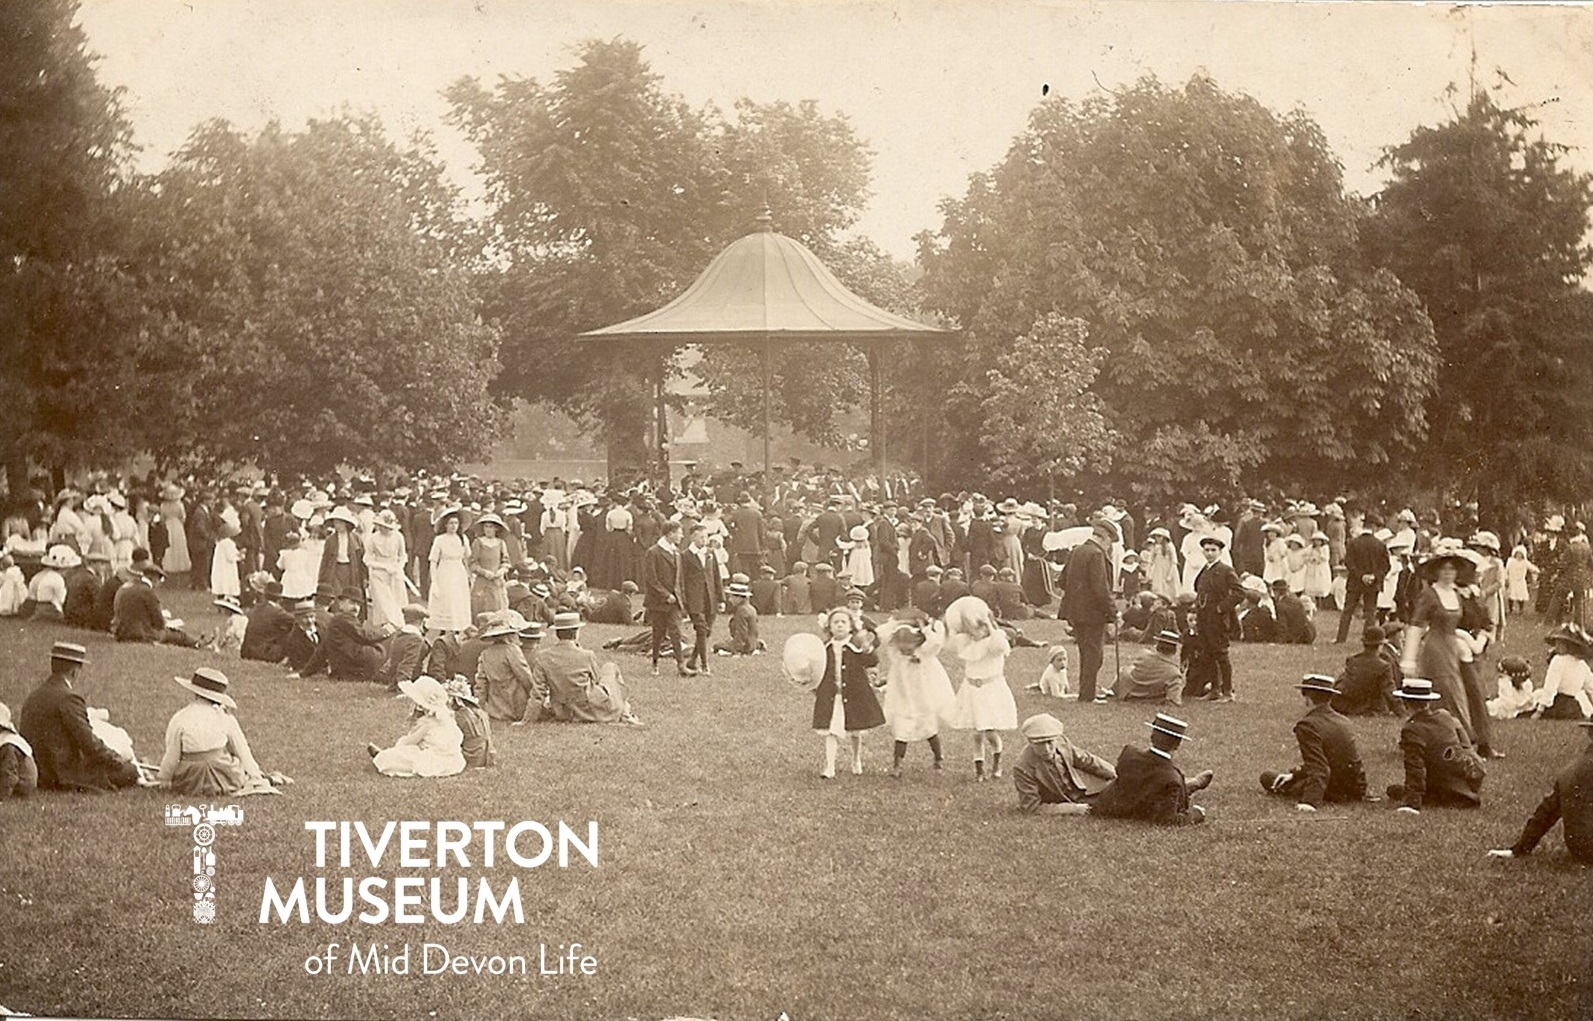 A busy day around the band stand in People's Park c.1900